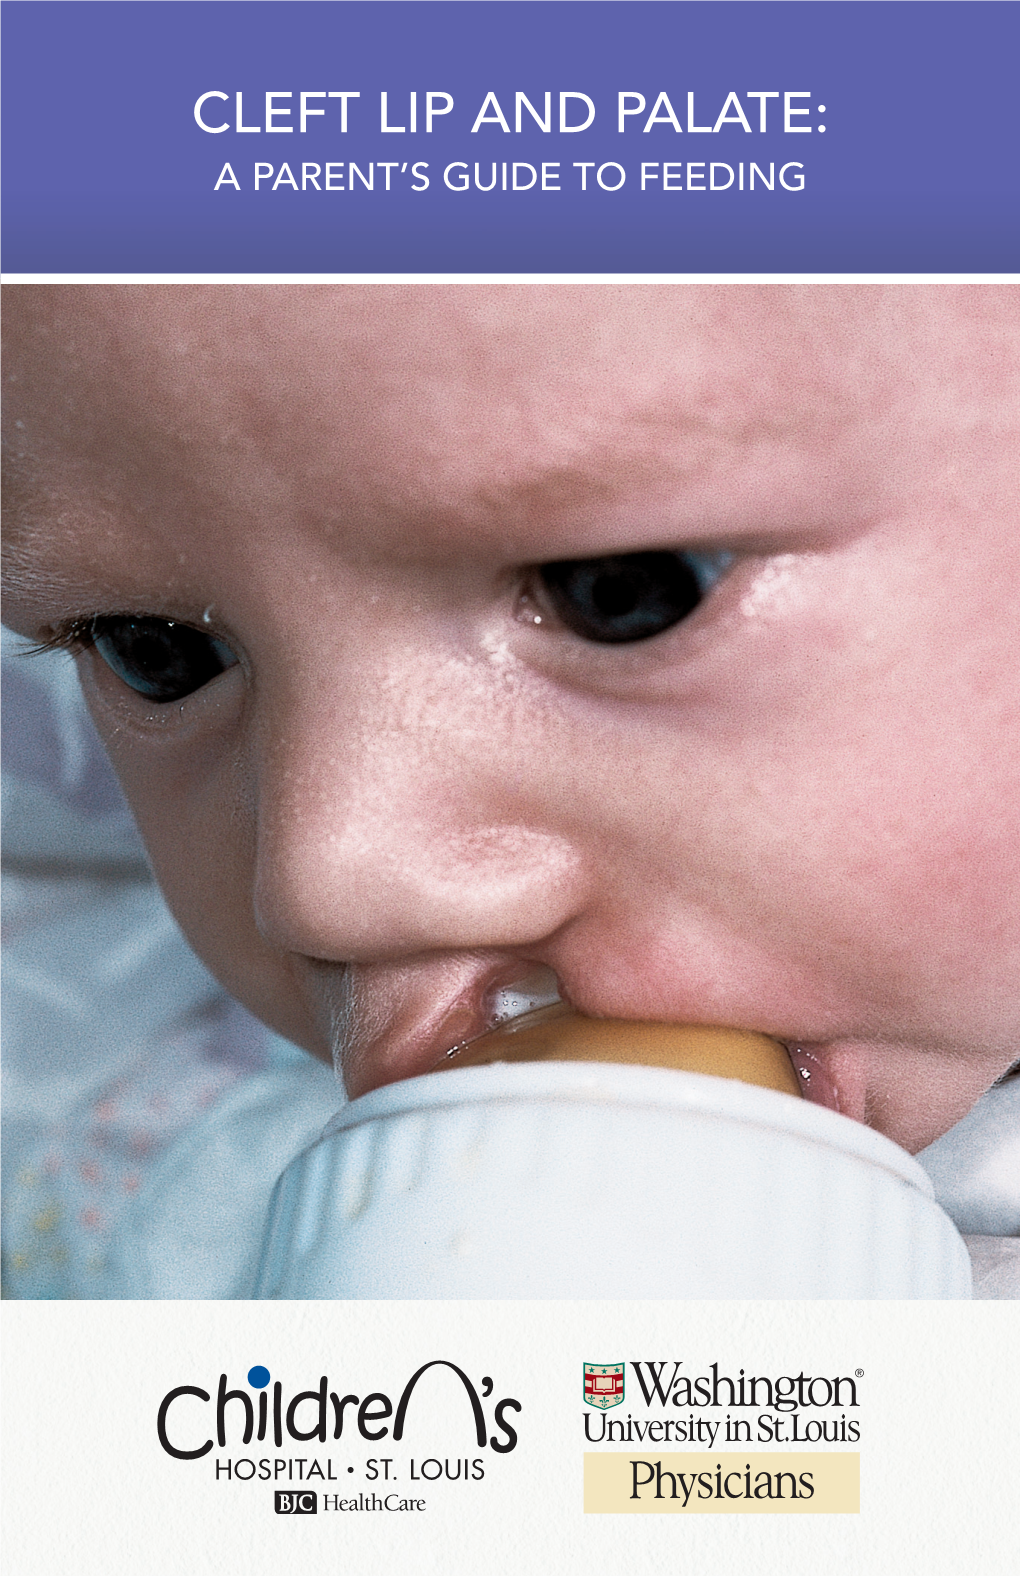 CLEFT LIP and PALATE: a PARENT’S GUIDE to FEEDING Congratulations on the Birth of Your New Child